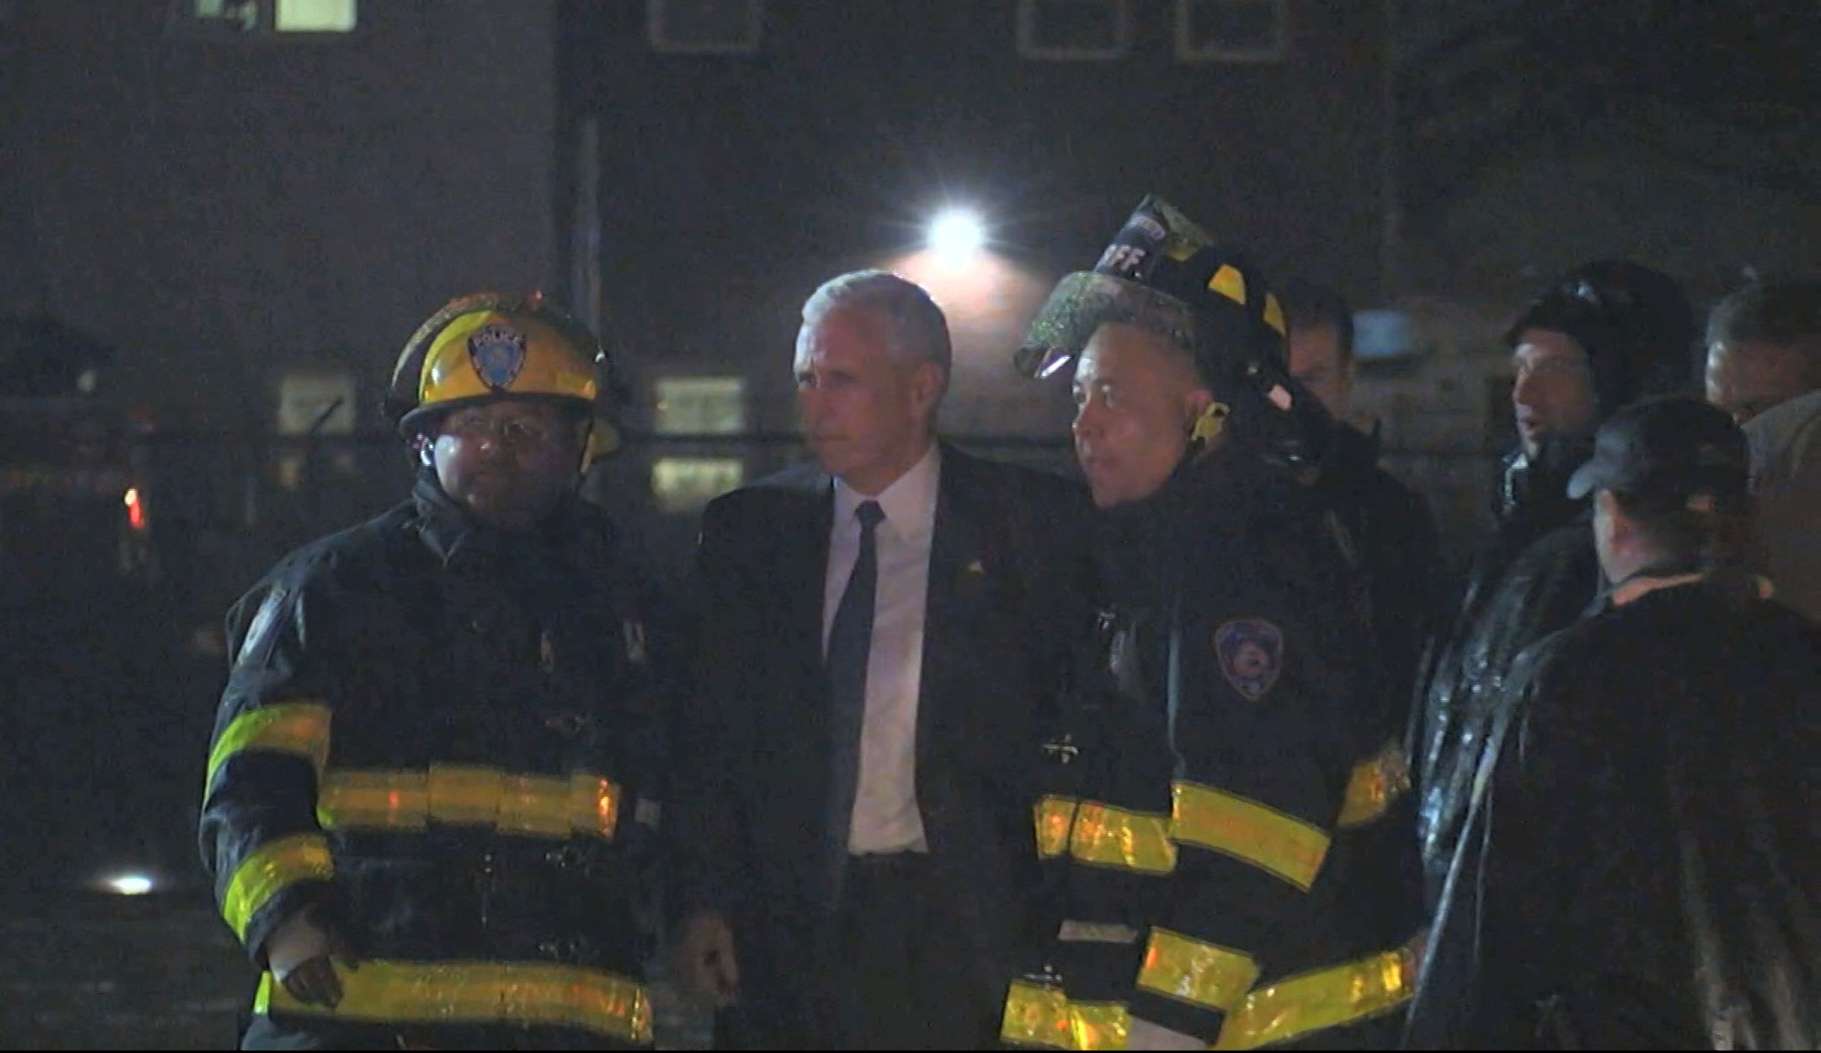 Republican presidential candidate Mike Pence with firefighters at New York's LaGuardia Airport after his campaign plane slid off the runway while landing on Thursday. Photo: AP